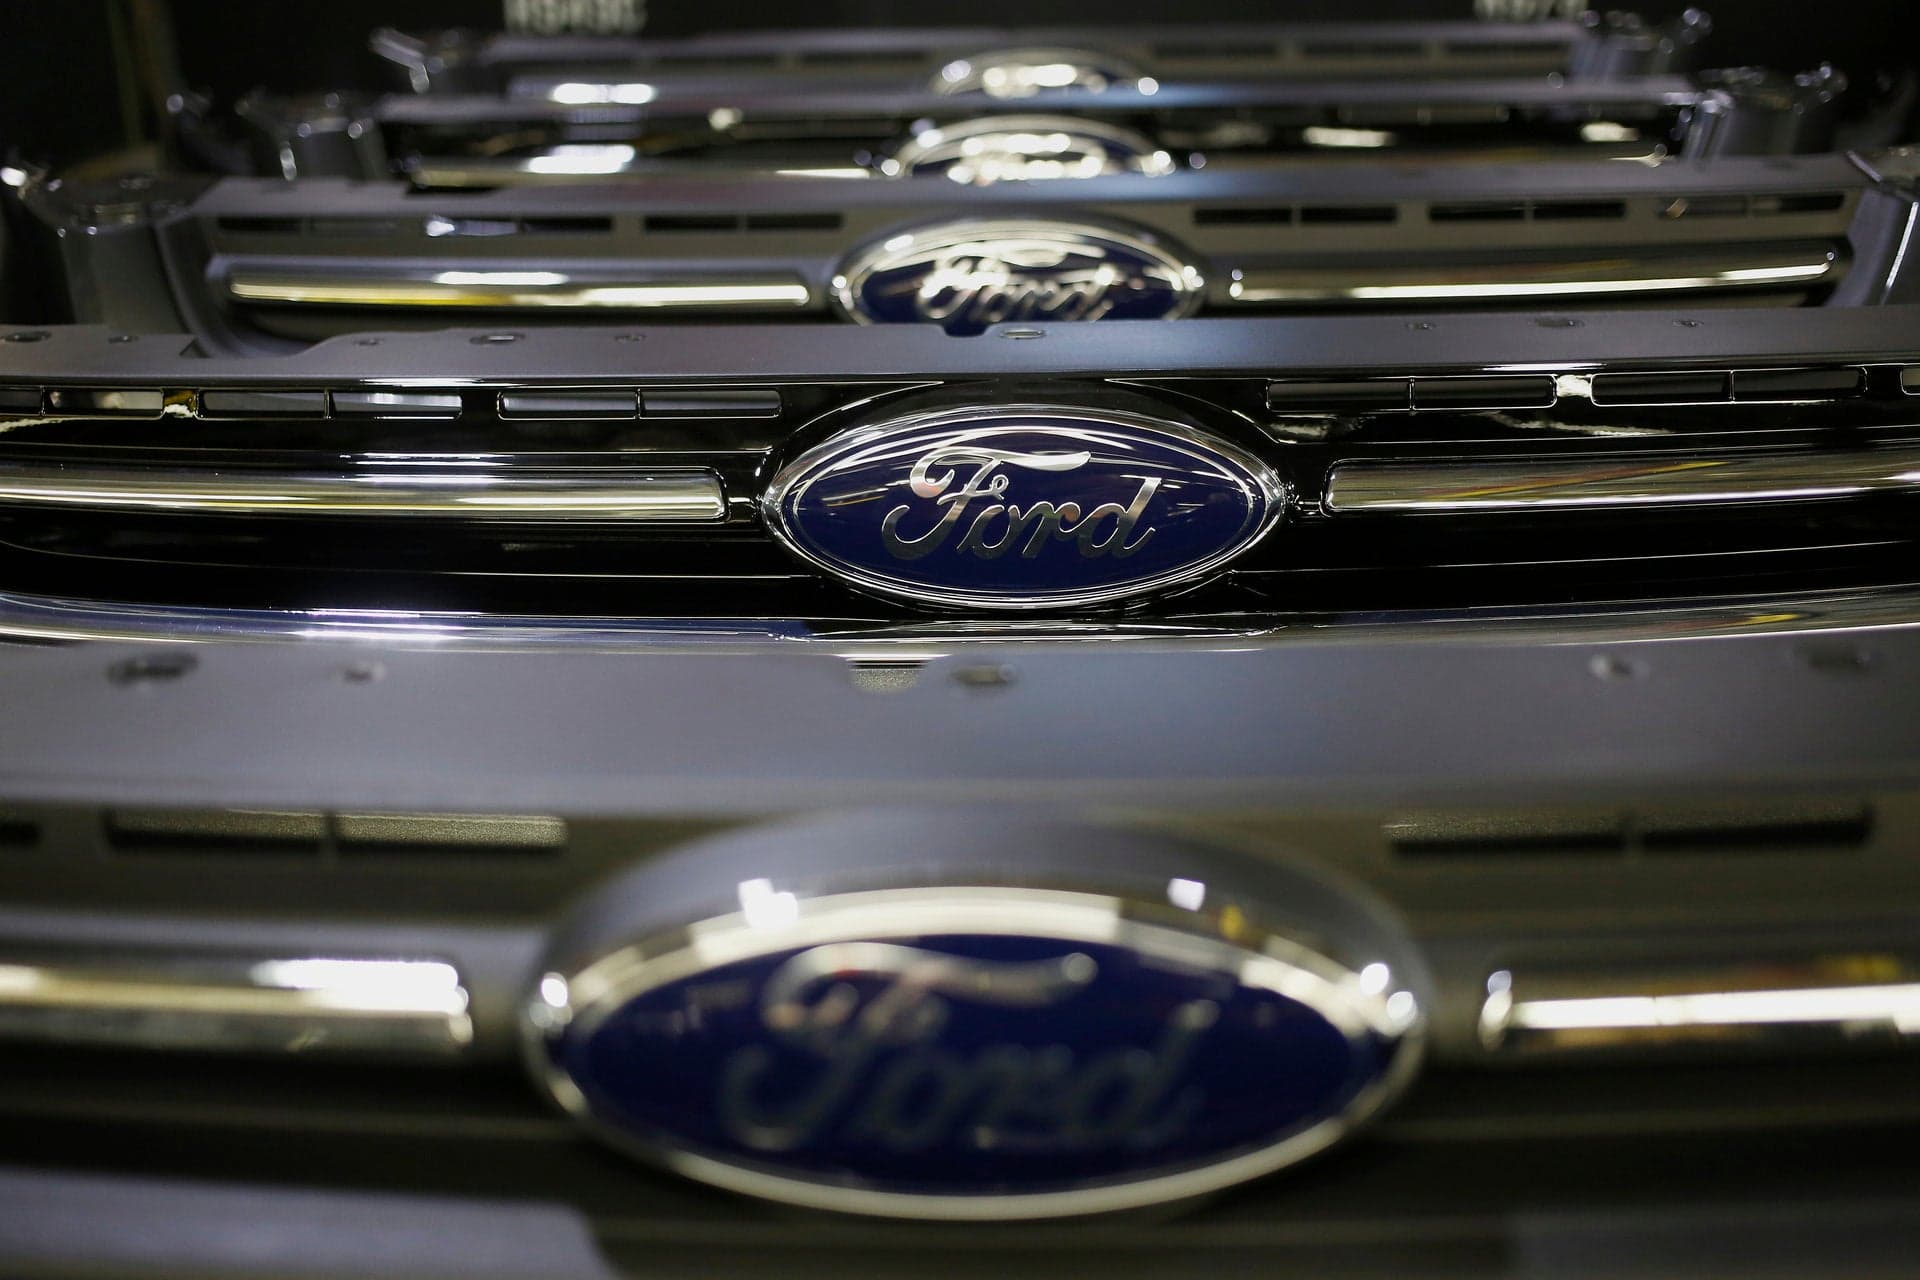 Faulty Seat Belt Mechanism Prompts Recall of 680,000 Ford Vehicles